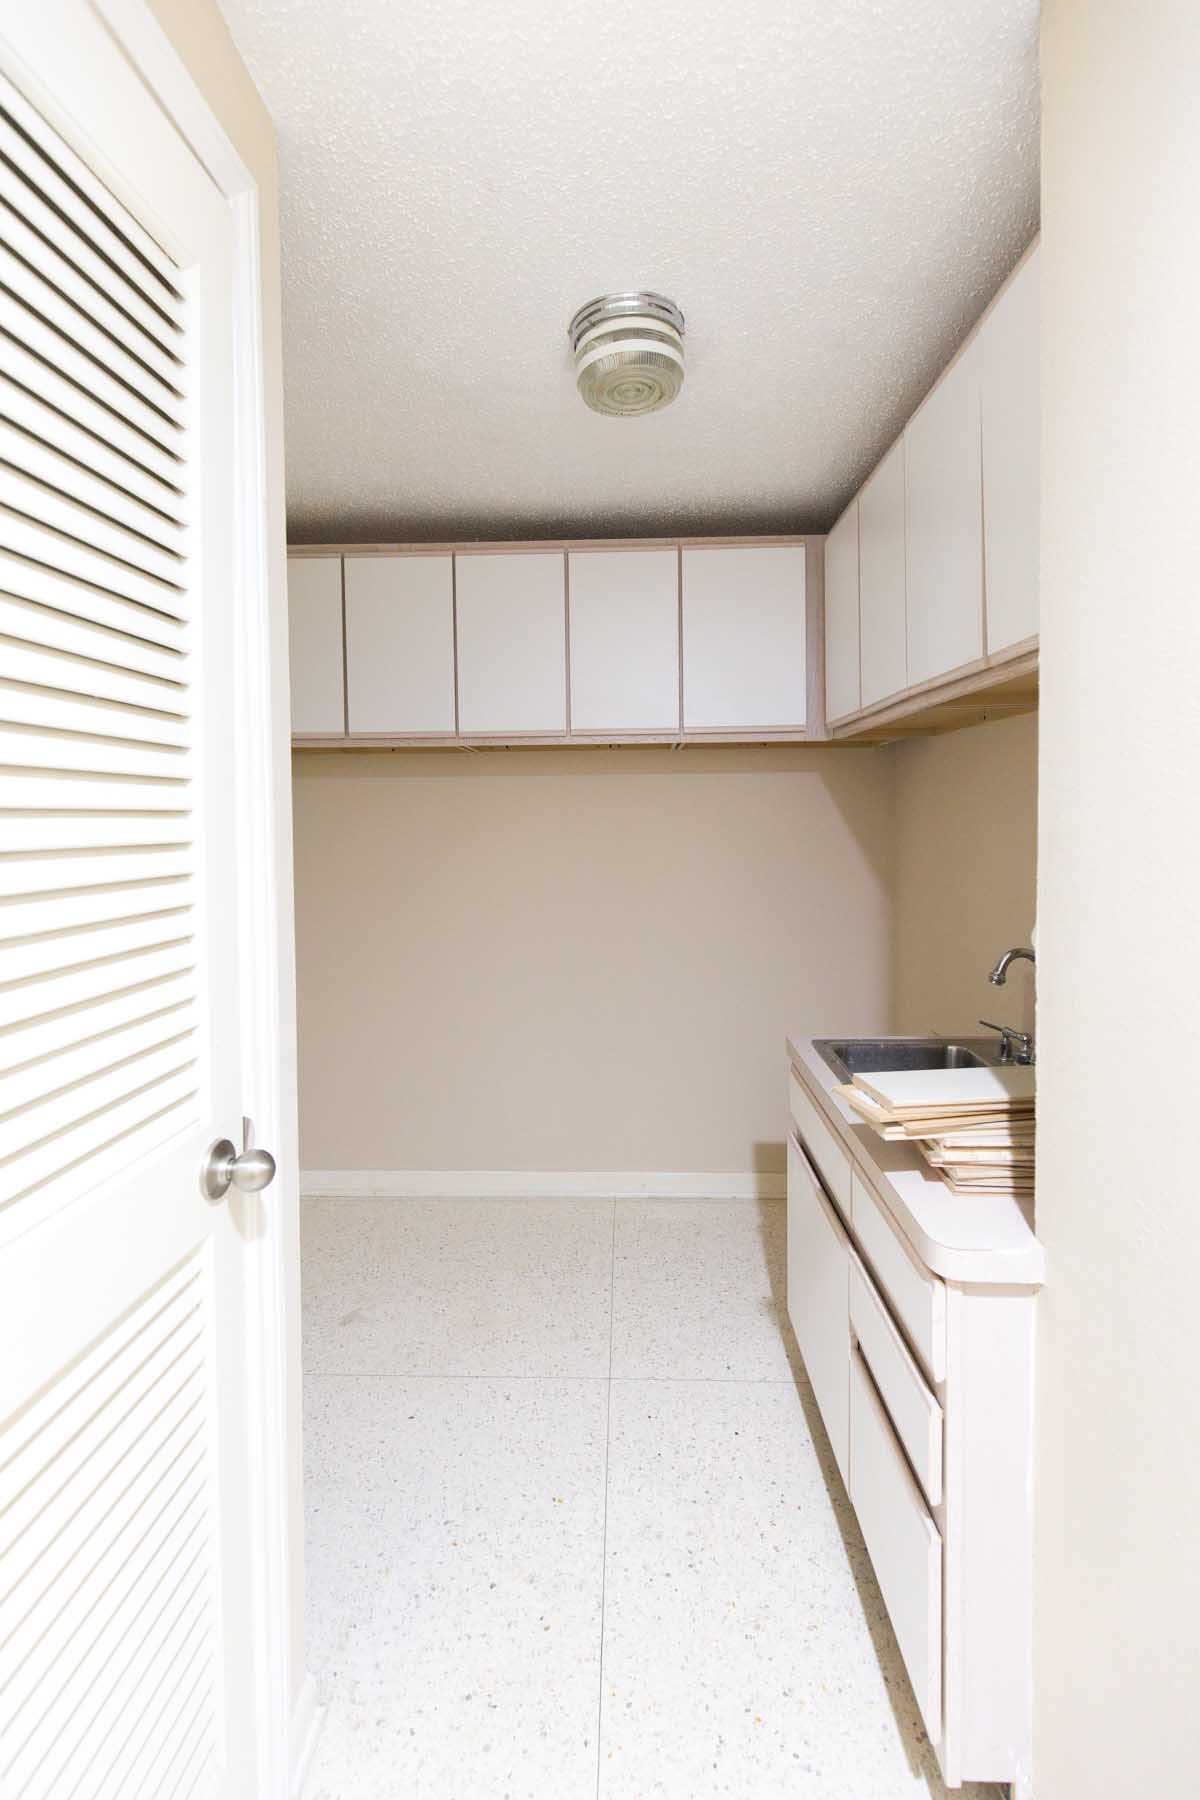 before photo - Sharing the concept for our new mid century modern kitchen design plan with a traditional flair! by Top Houston lifestyle blog Ashley Rose of sugar and cloth #kitchen #design #interiors #homedecor